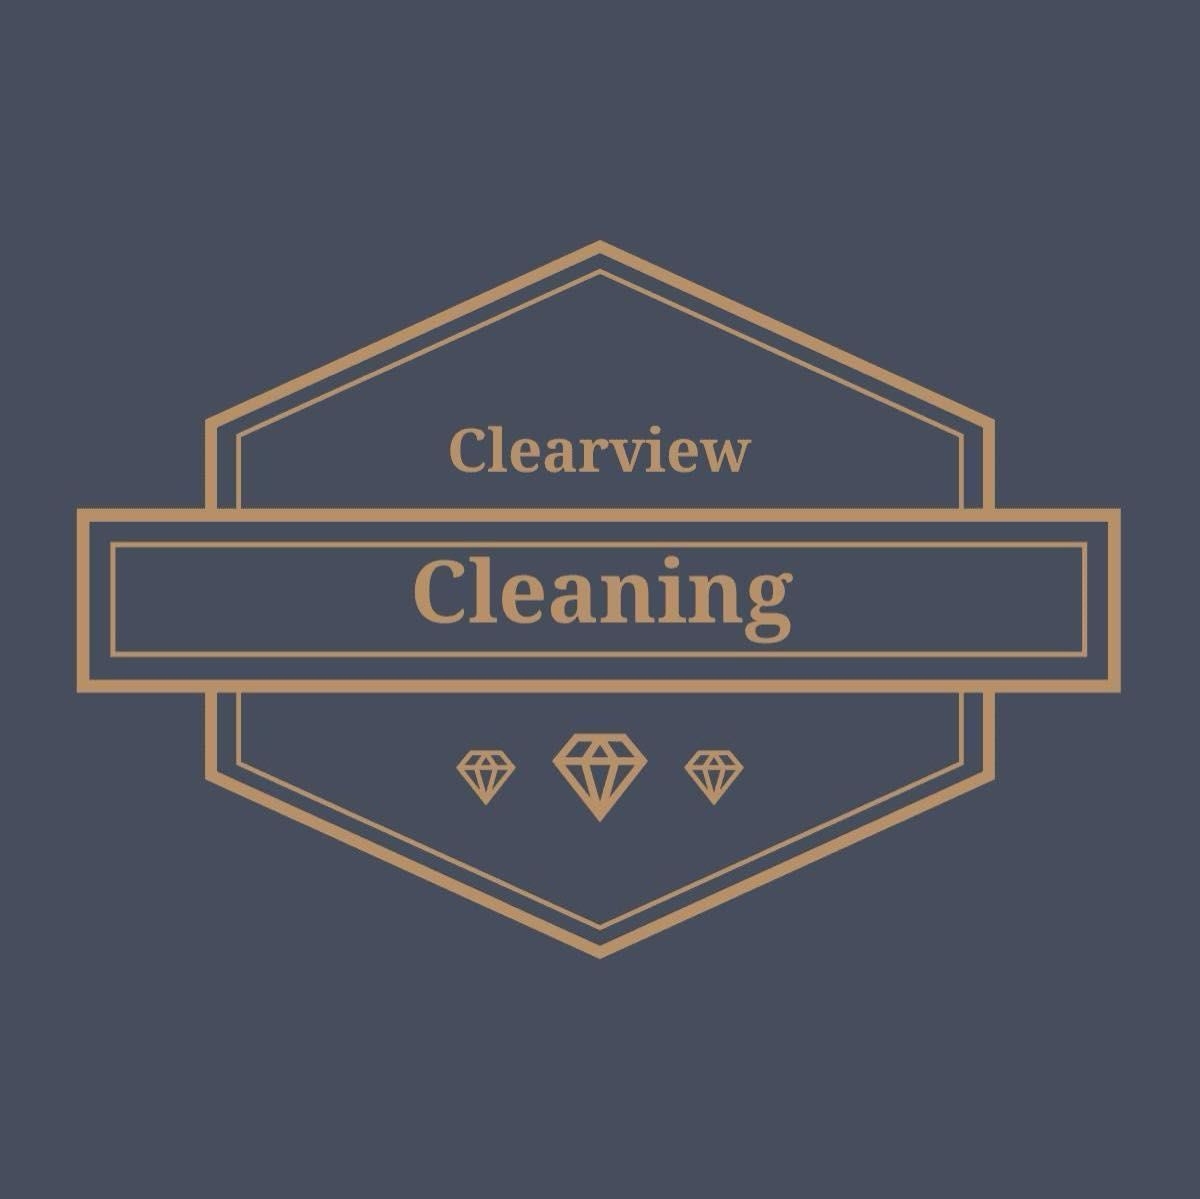 Clearview Cleaning, Akron, 44319